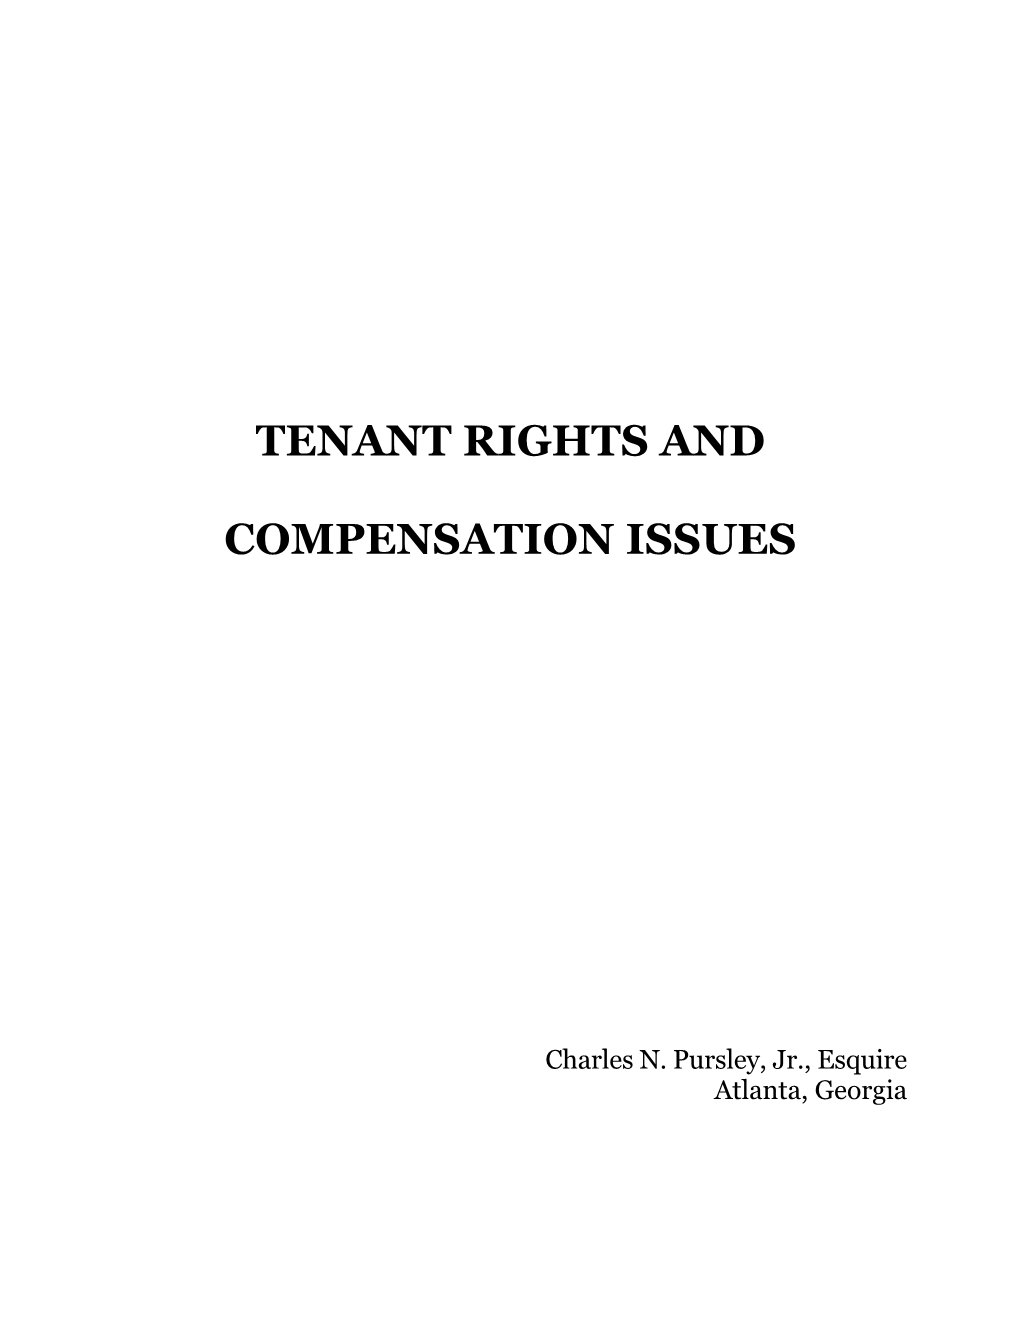 Tenant Rights and Compensation Issues